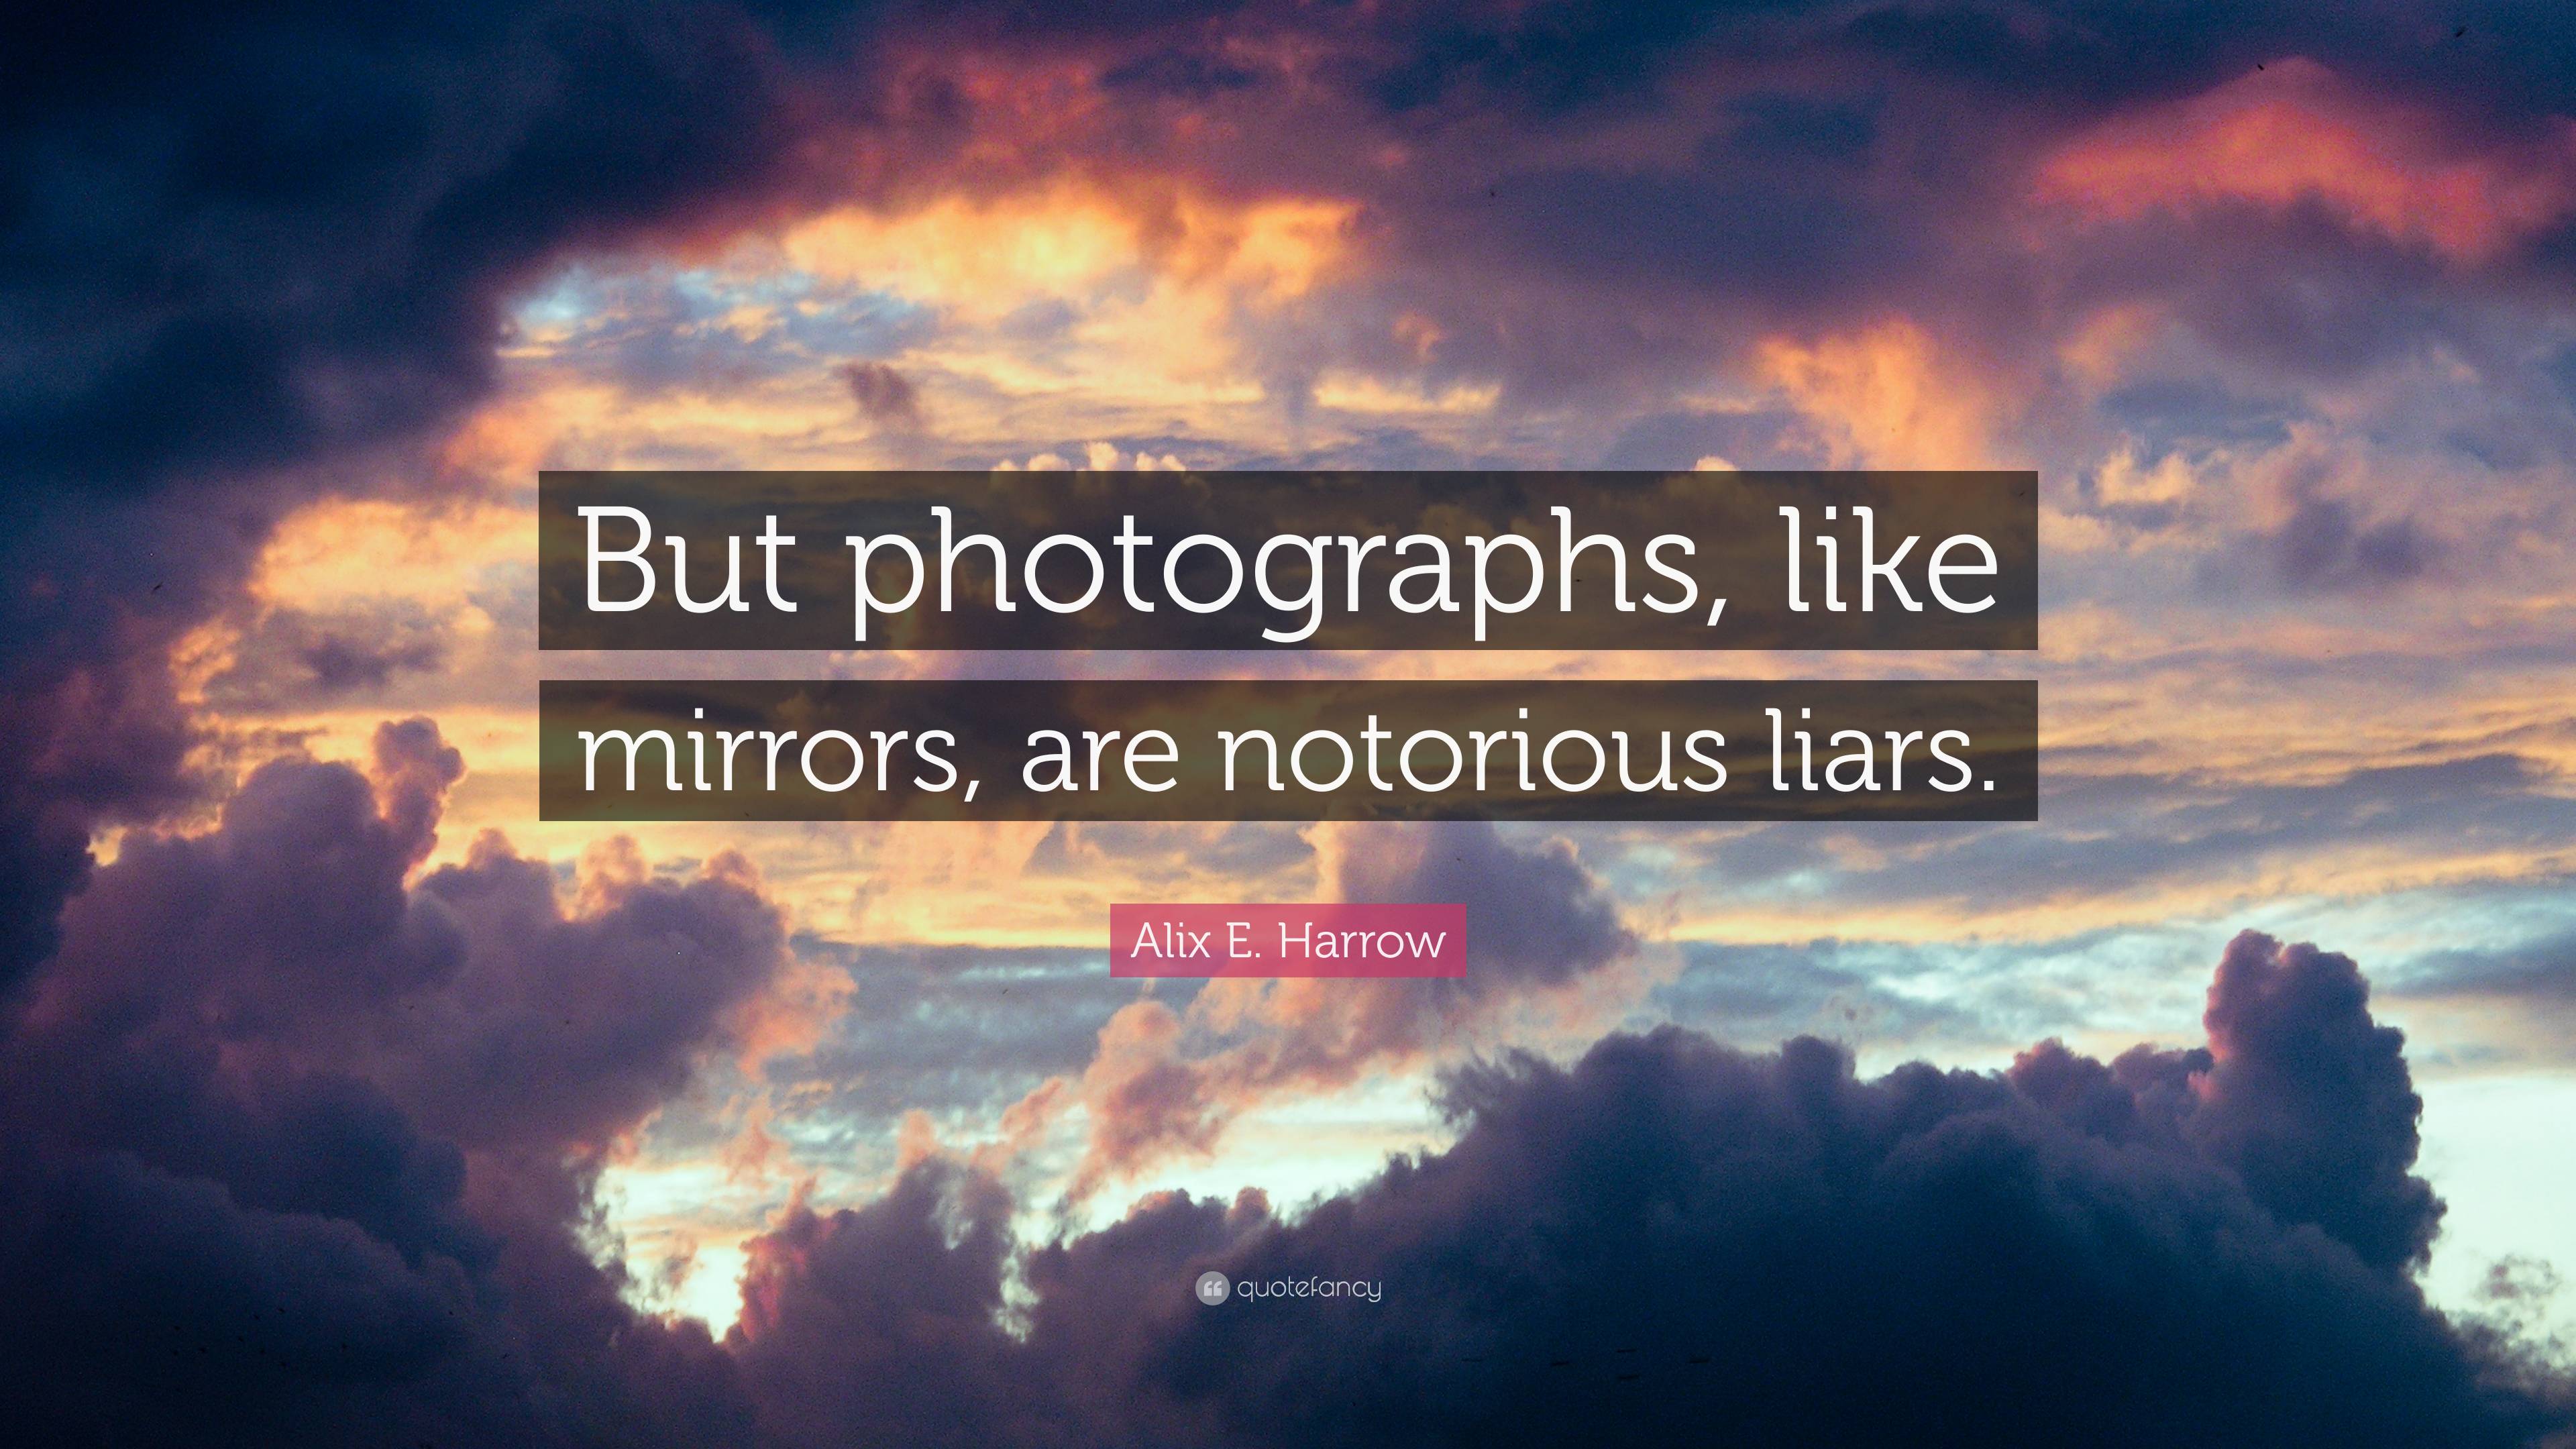 Alix E. Harrow Quote: “But photographs, like mirrors, are notorious liars.”